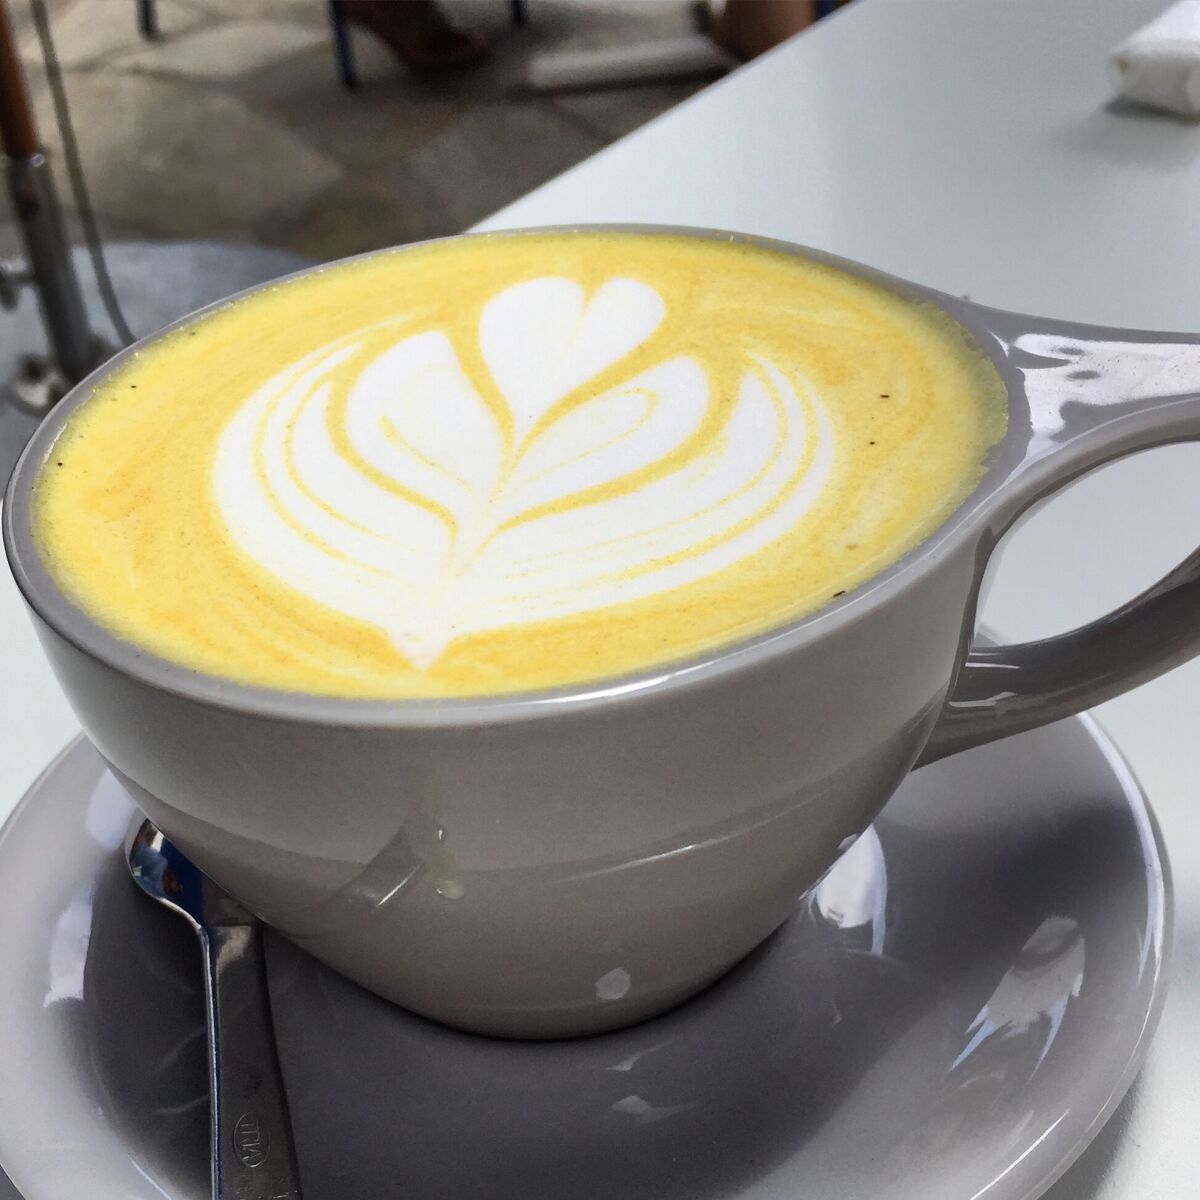 The turmeric latte at Parakeet Cafe is made with turmeric, ginger, vanilla, cardamom, honey and almond milk.